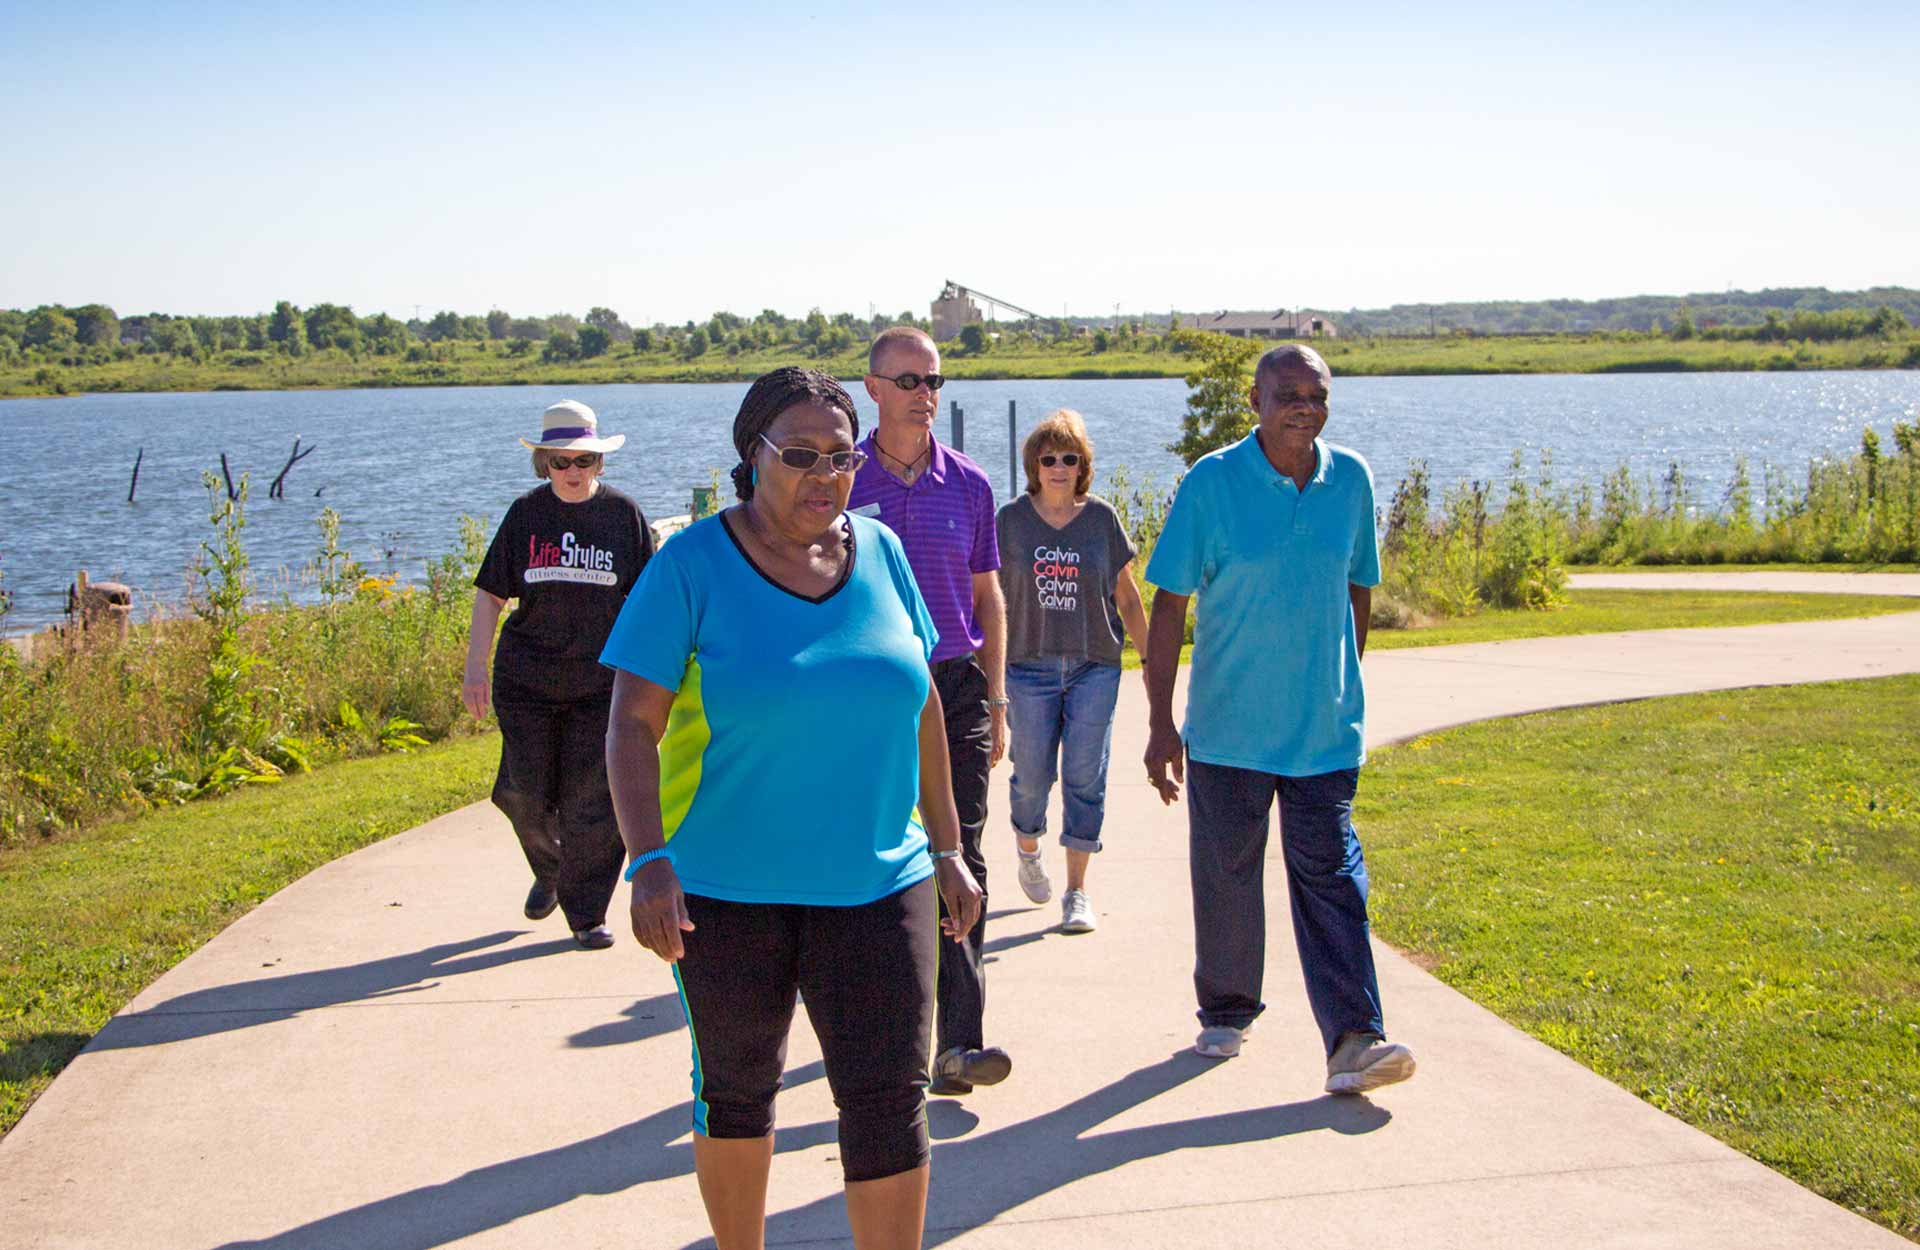 group of elderly adults on walking path next to lake